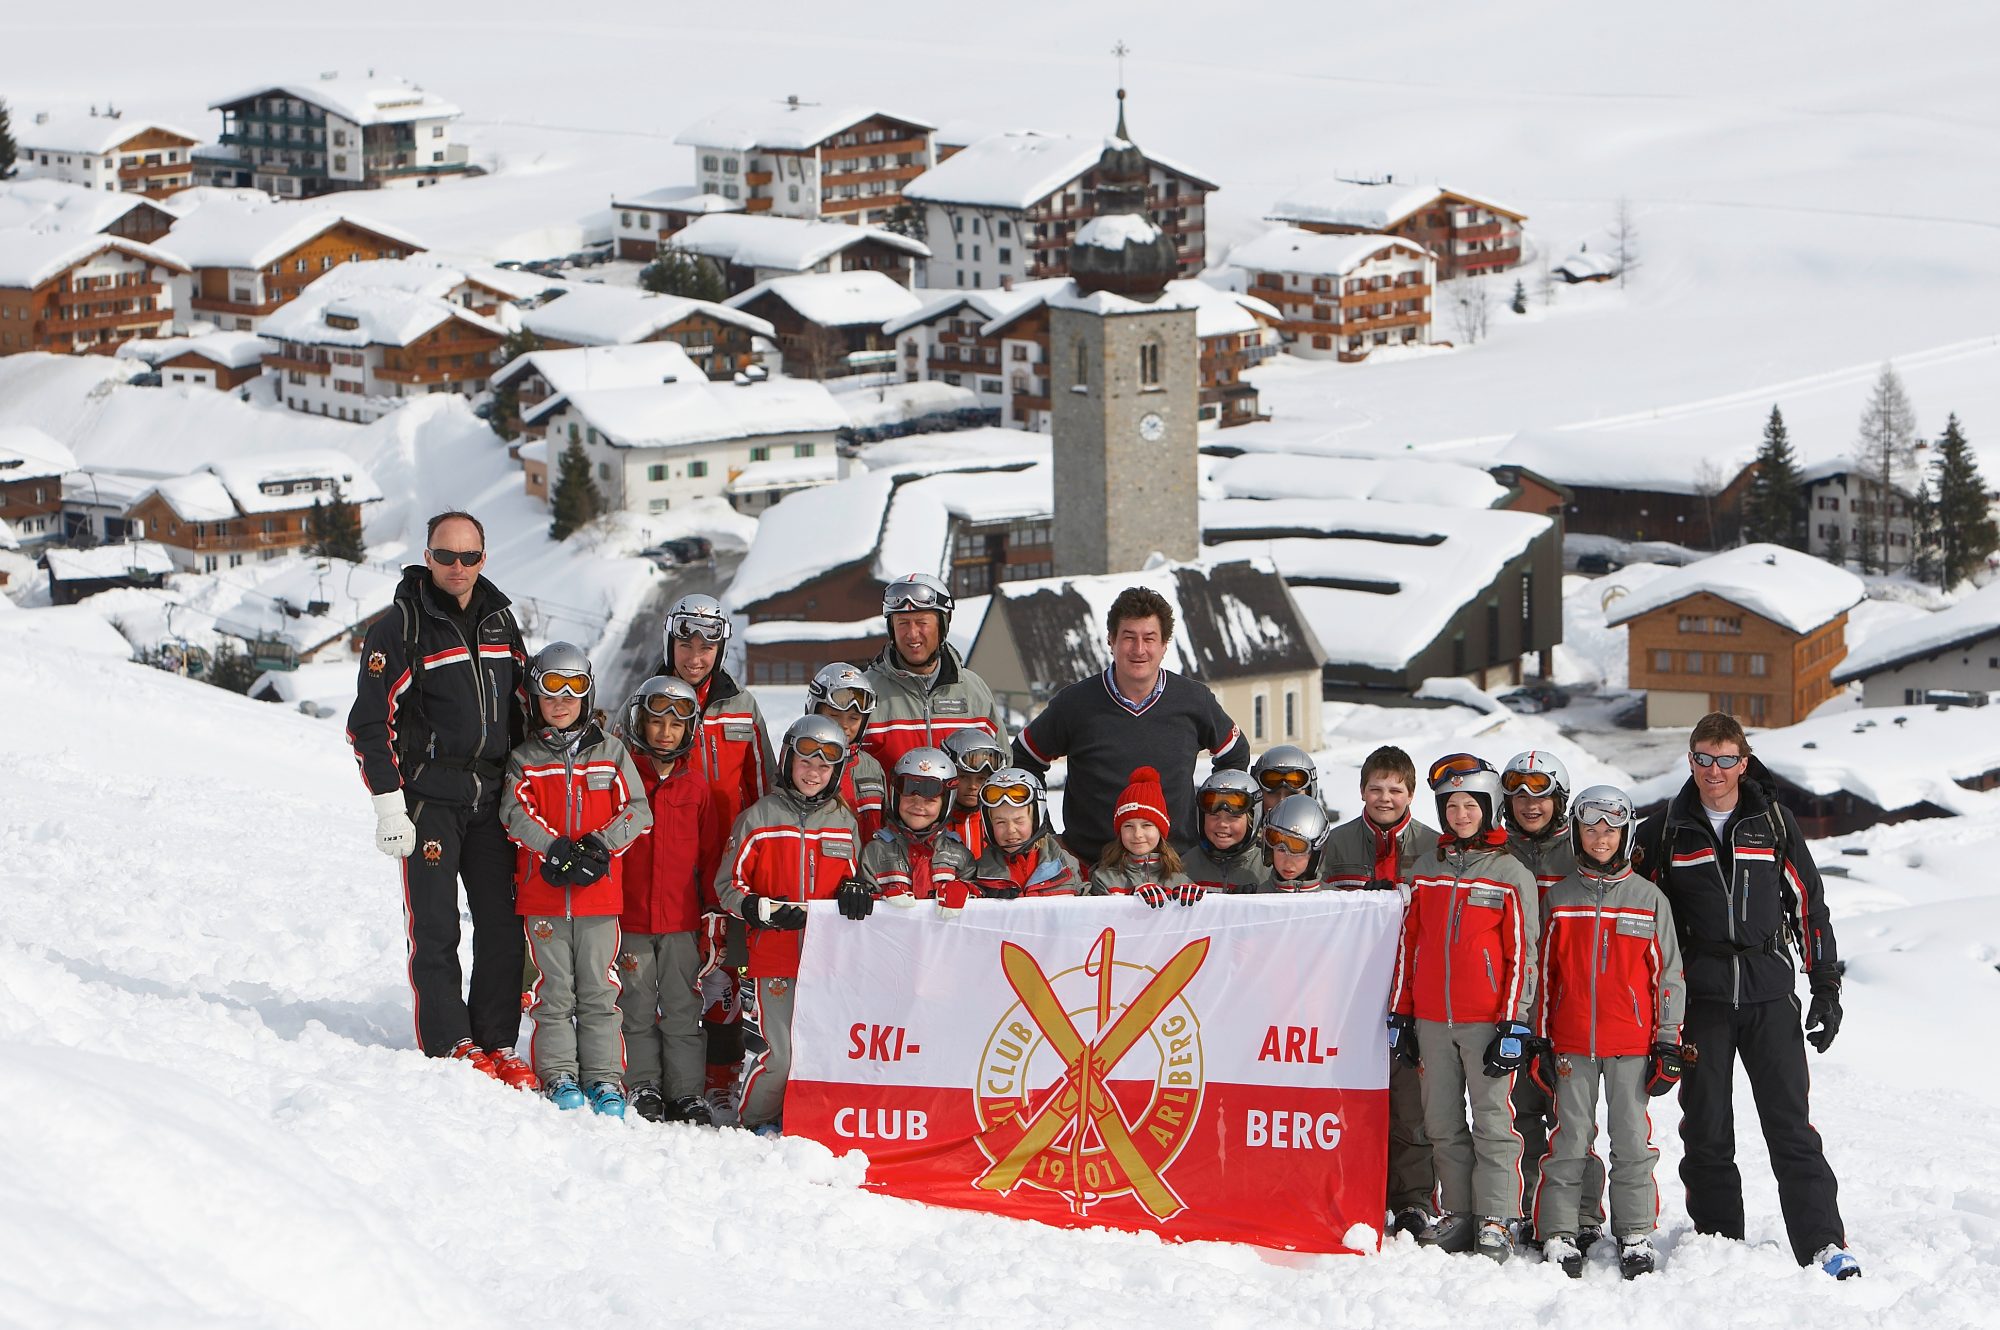 The Ski Club Arlberg posing for a group photo. Photo by Peter Mathis. Lech Zürs Tourismus. The Must-Read Guide to Lech. 